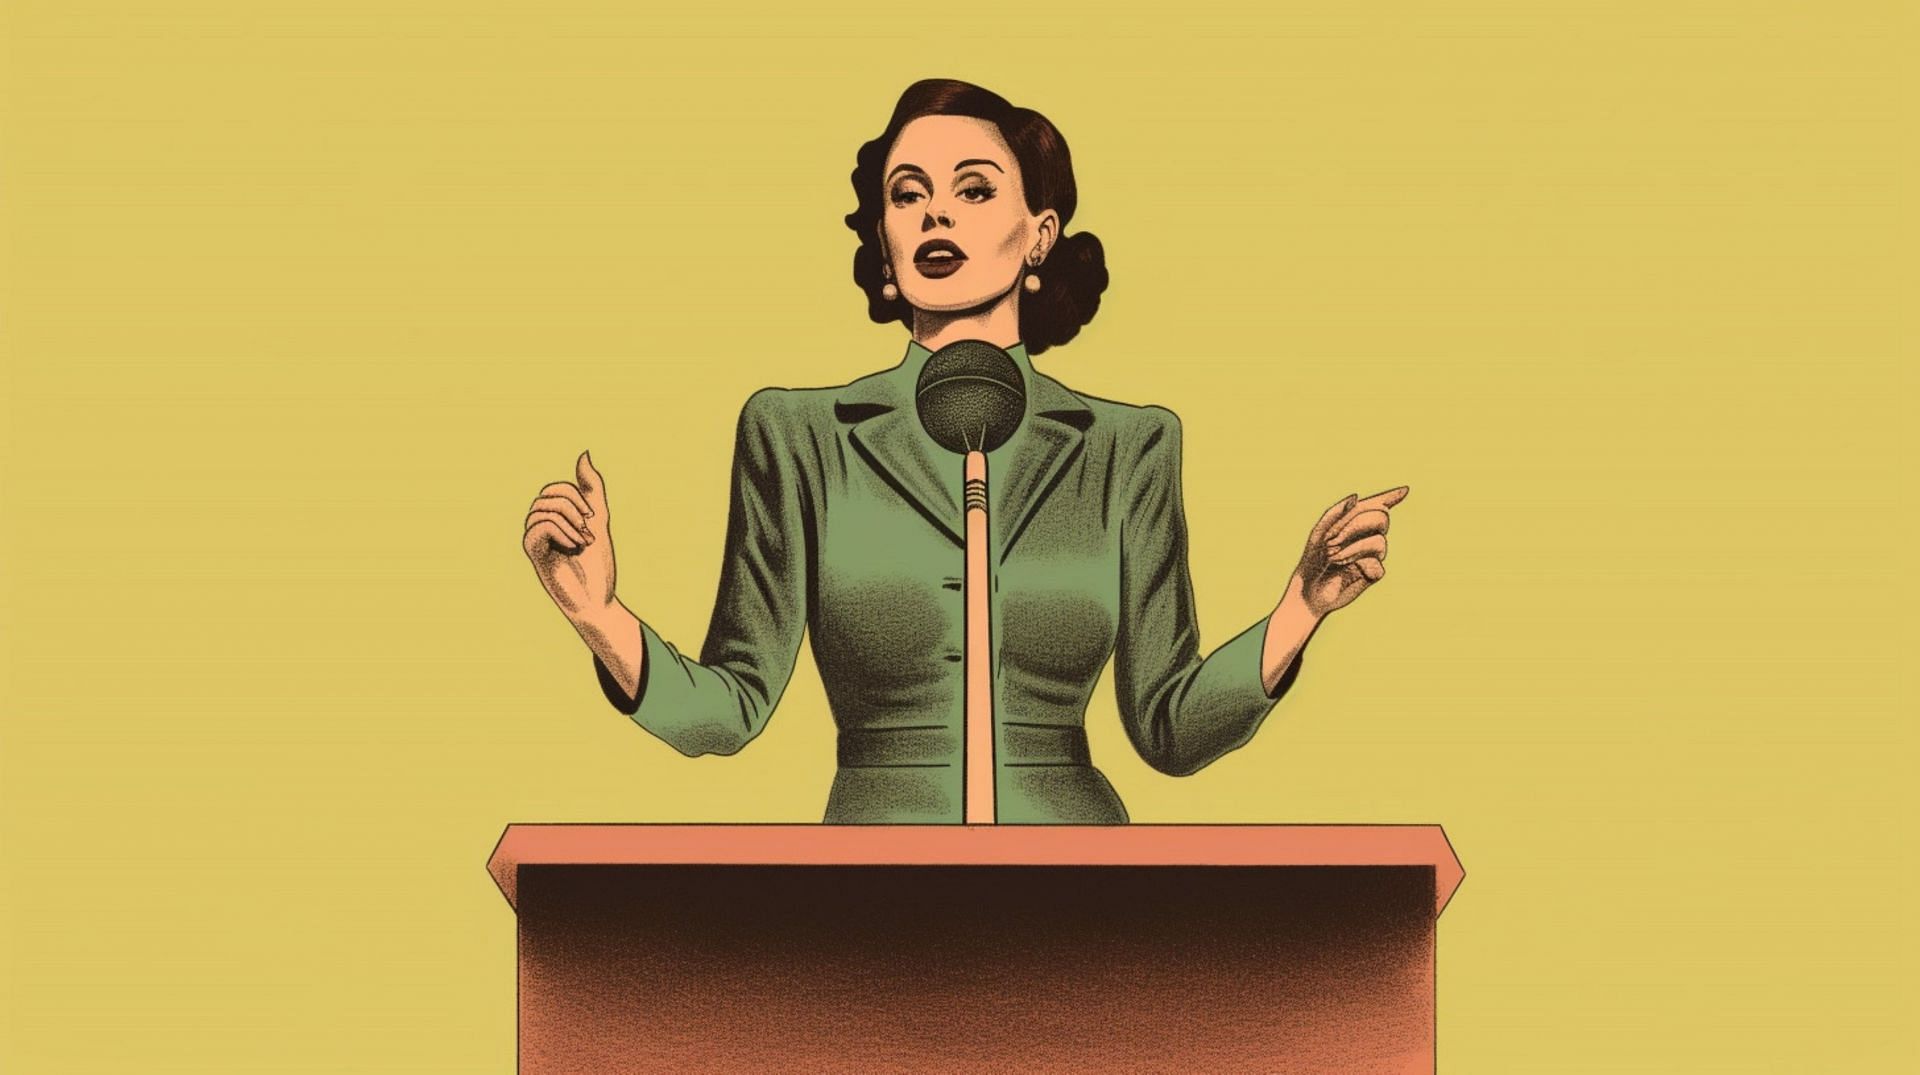 There are ways to manage your fear of public speaking. (Image via Vecteezy/Icon ade)